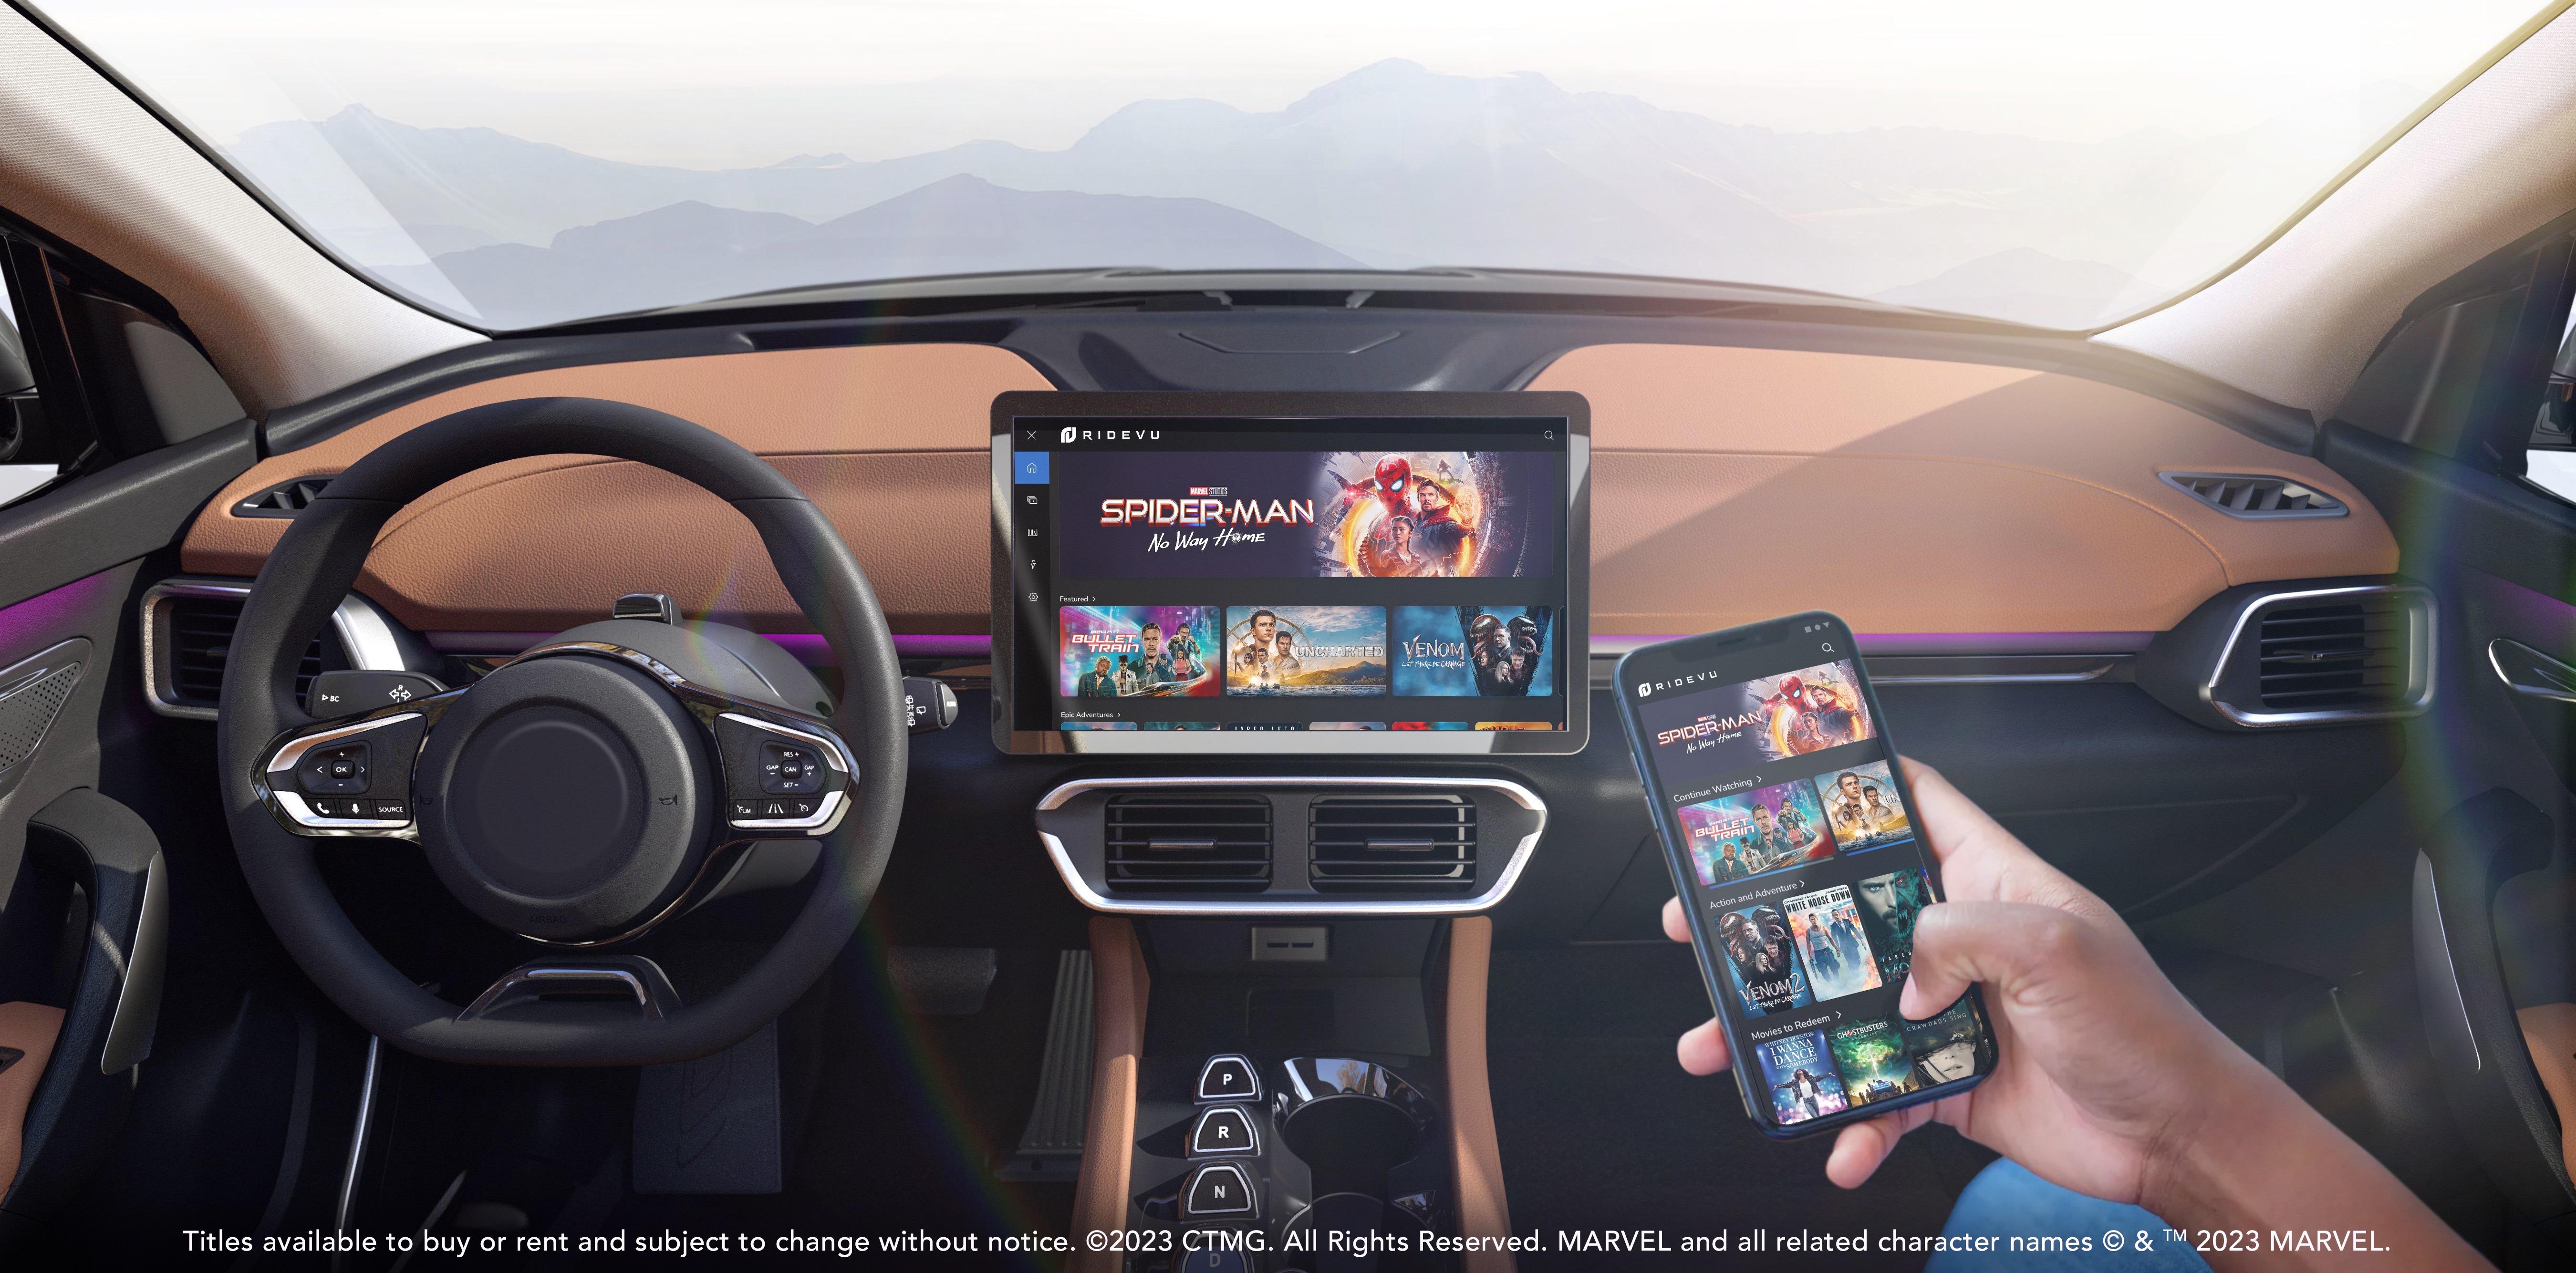 RIDEVU In-Vehicle Streaming Service Launches This Summer to Provide Entertainment in Cars